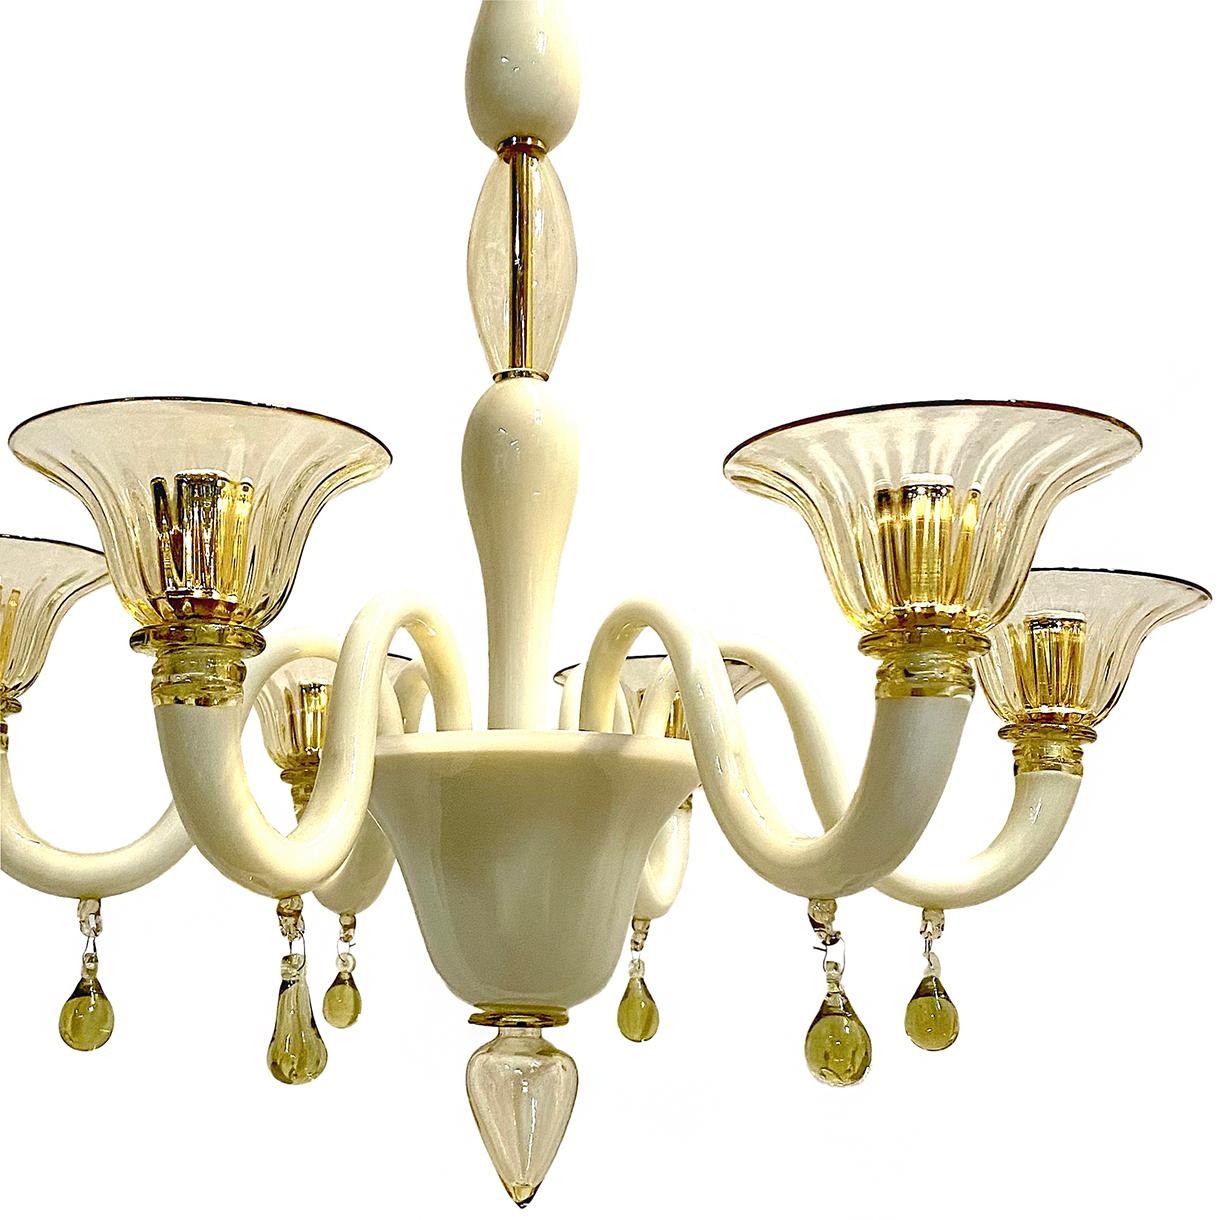 A circa 1960's Italian Murano cream and amber glass chandelier with 6 lights. 

Measurements:
Current drop: 30